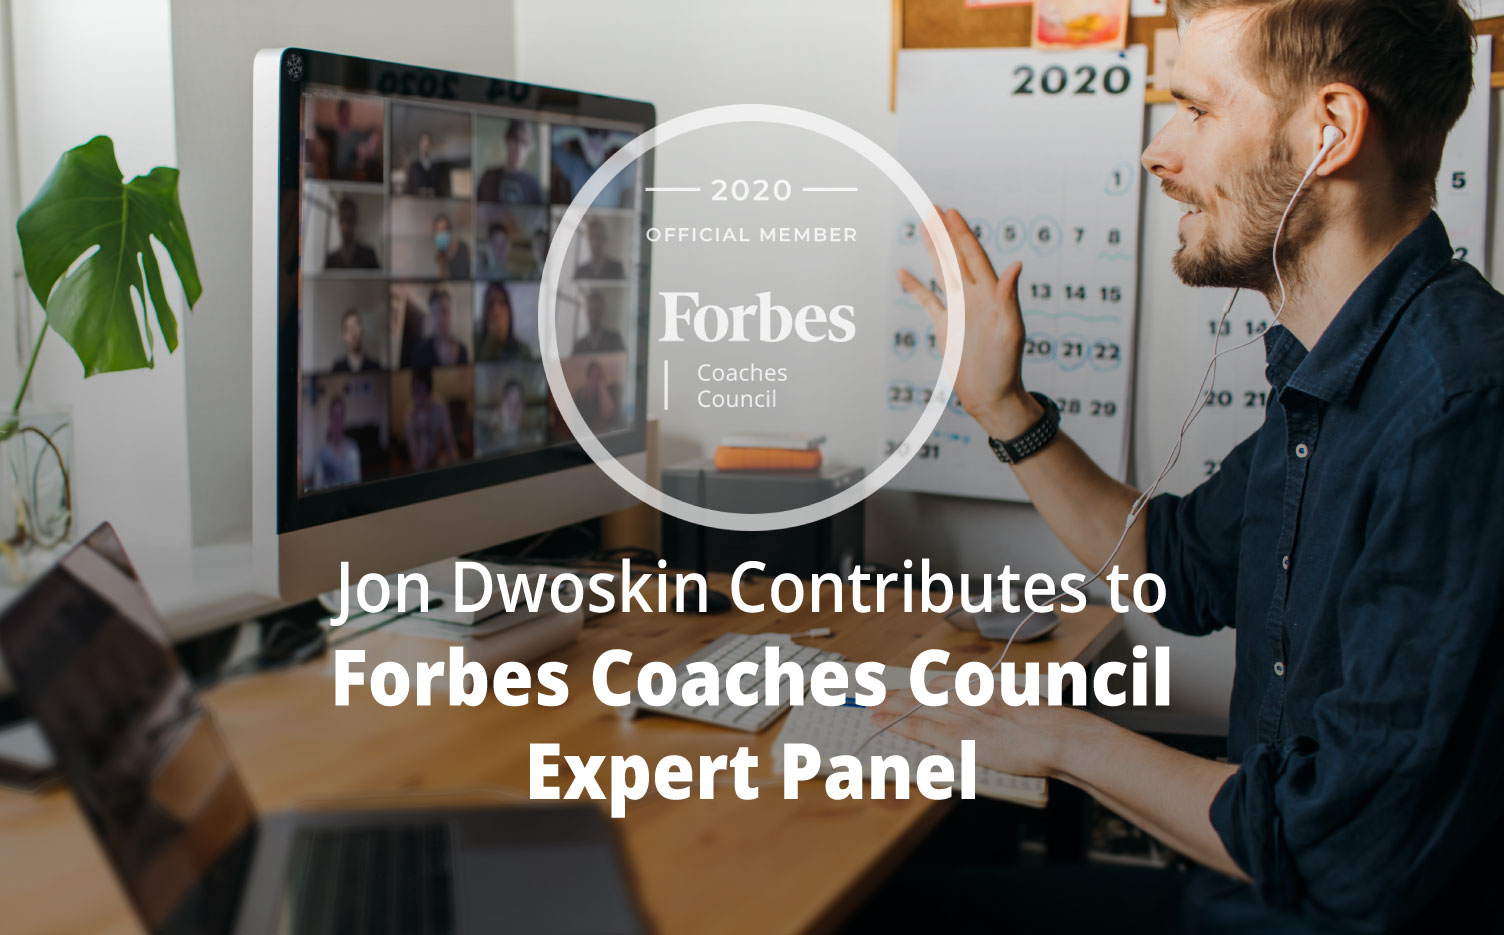 Jon Dwoskin Contributes to Forbes Coaches Council Expert Panel: 14 Engaging Ways To Connect With And Inspire Virtual Audiences